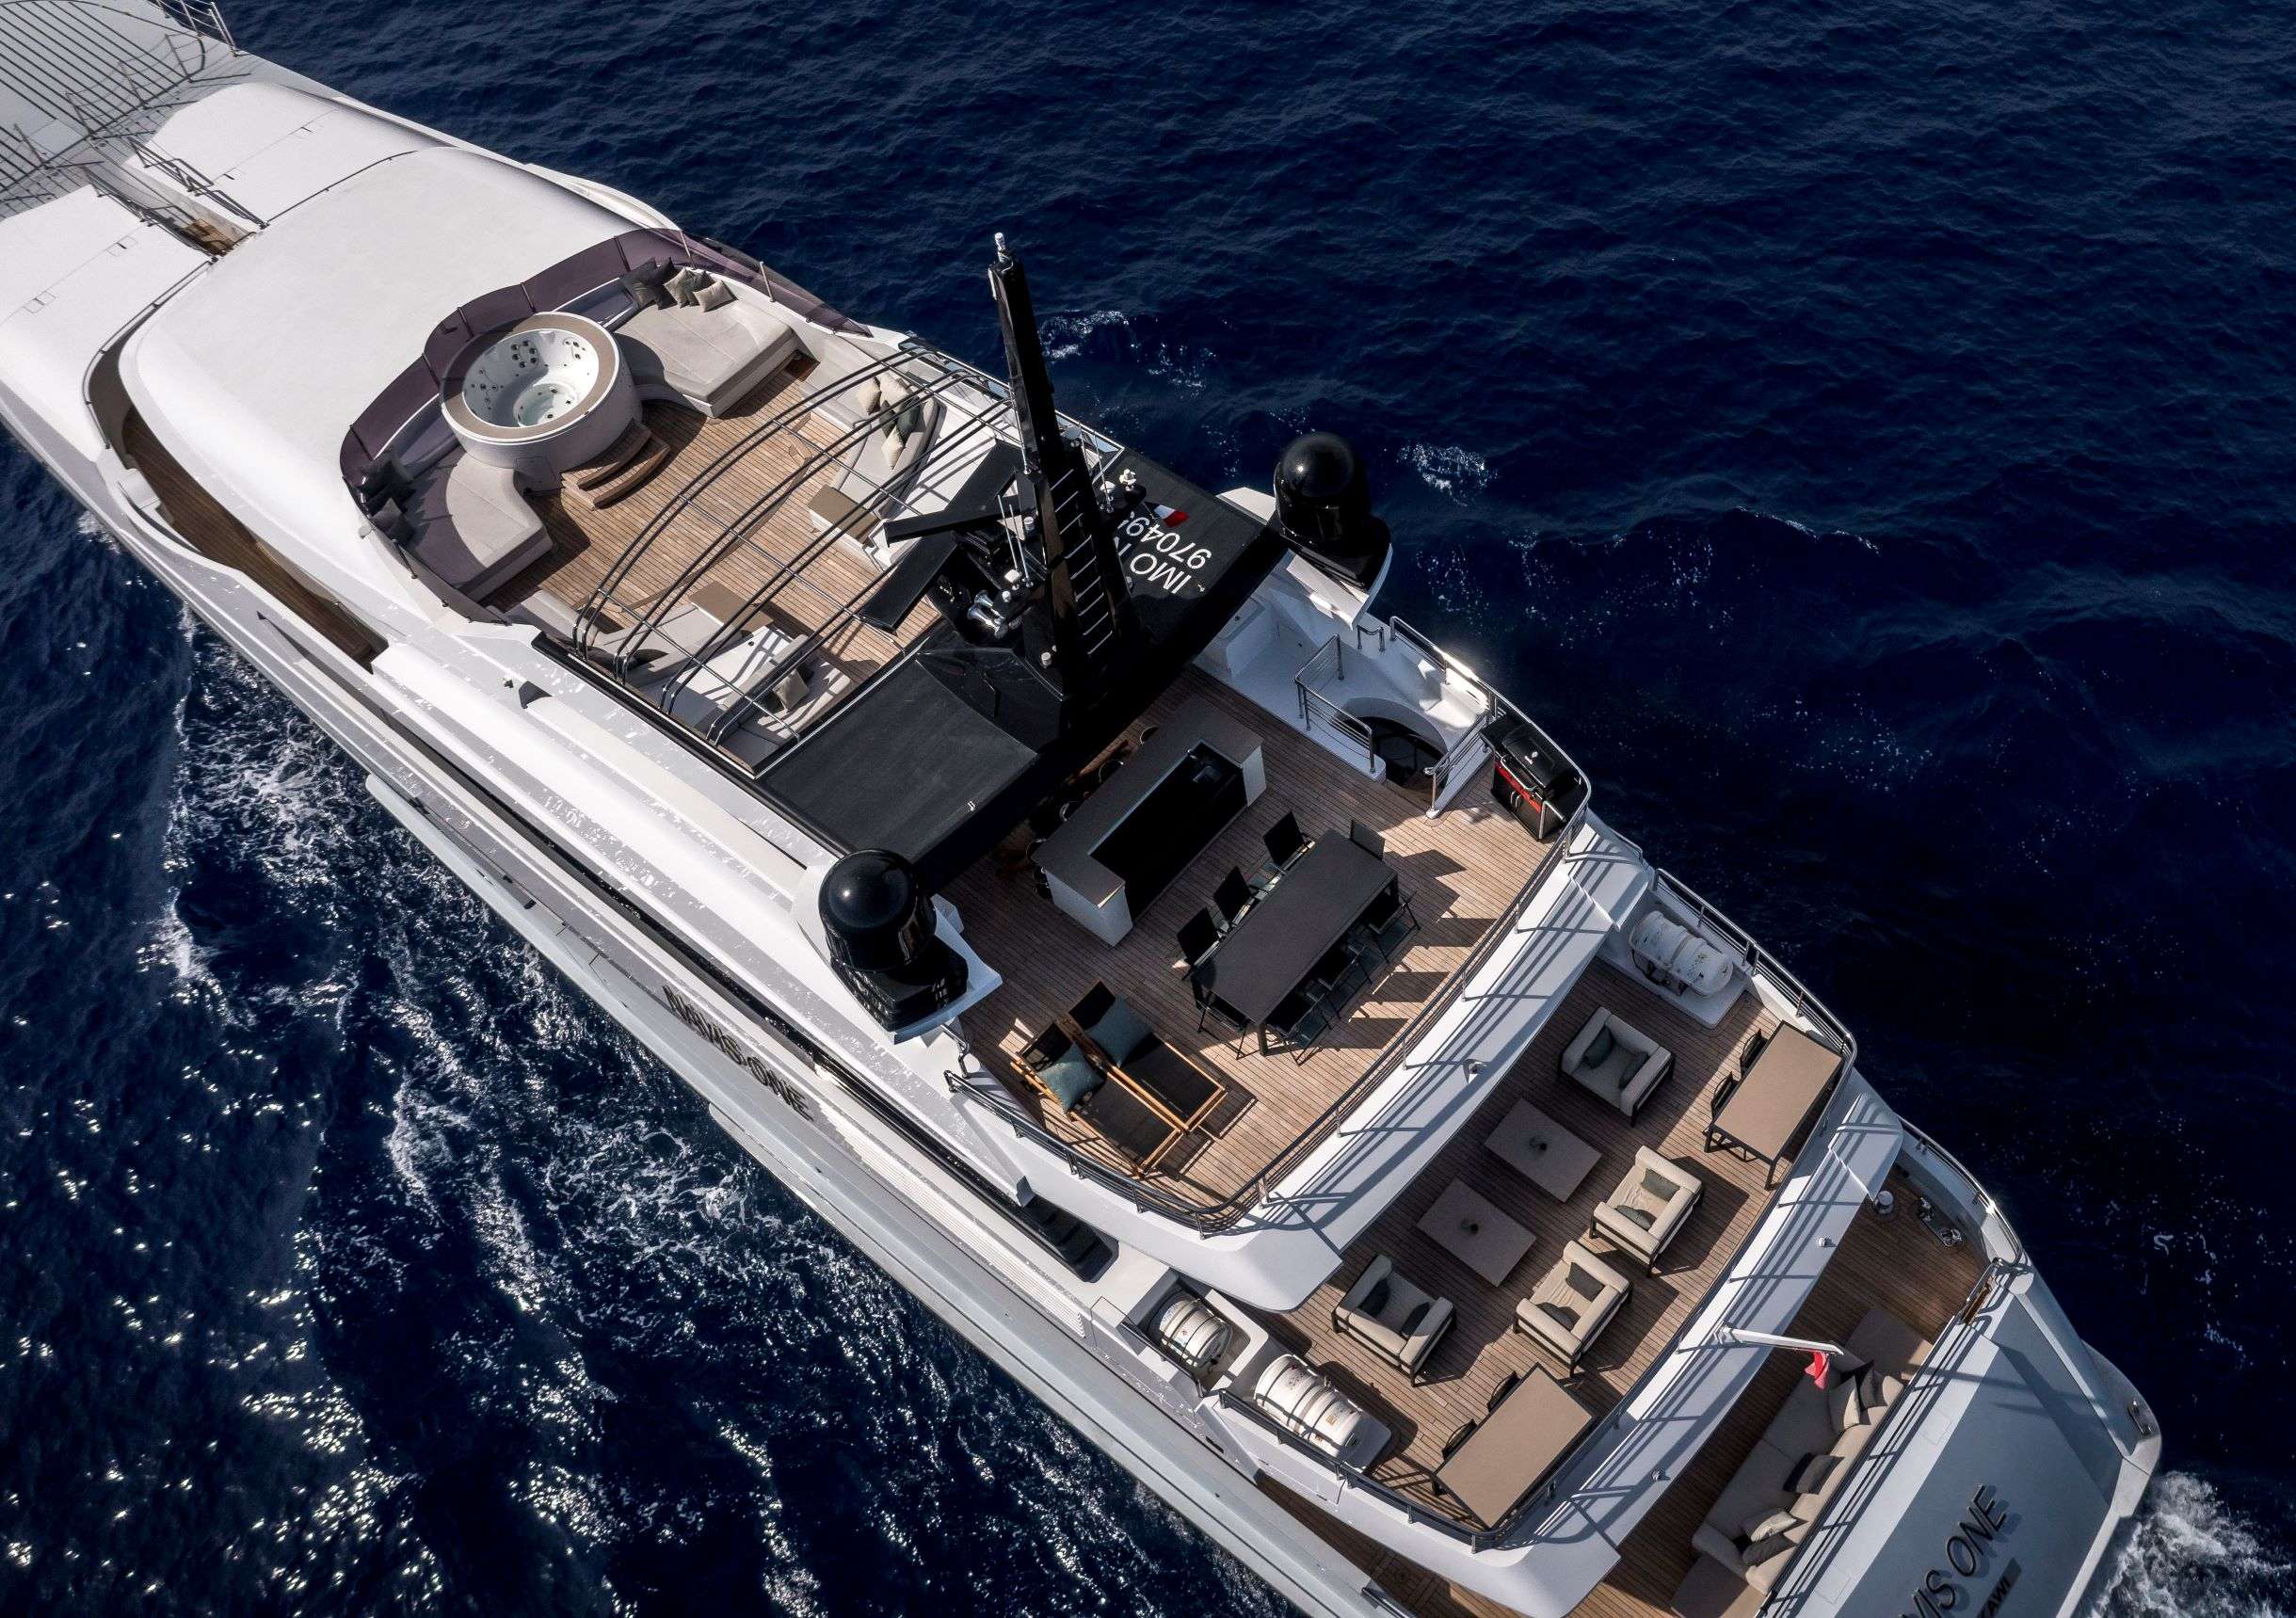 NAVIS ONE - Superyacht charter Thailand & Boat hire in Summer: W. Med -Naples/Sicily, Greece, W. Med -Riviera/Cors/Sard., Turkey, W. Med - Spain/Balearics, Croatia | Winter: Indian Ocean and SE Asia, Red Sea, United Arab Emirates 5